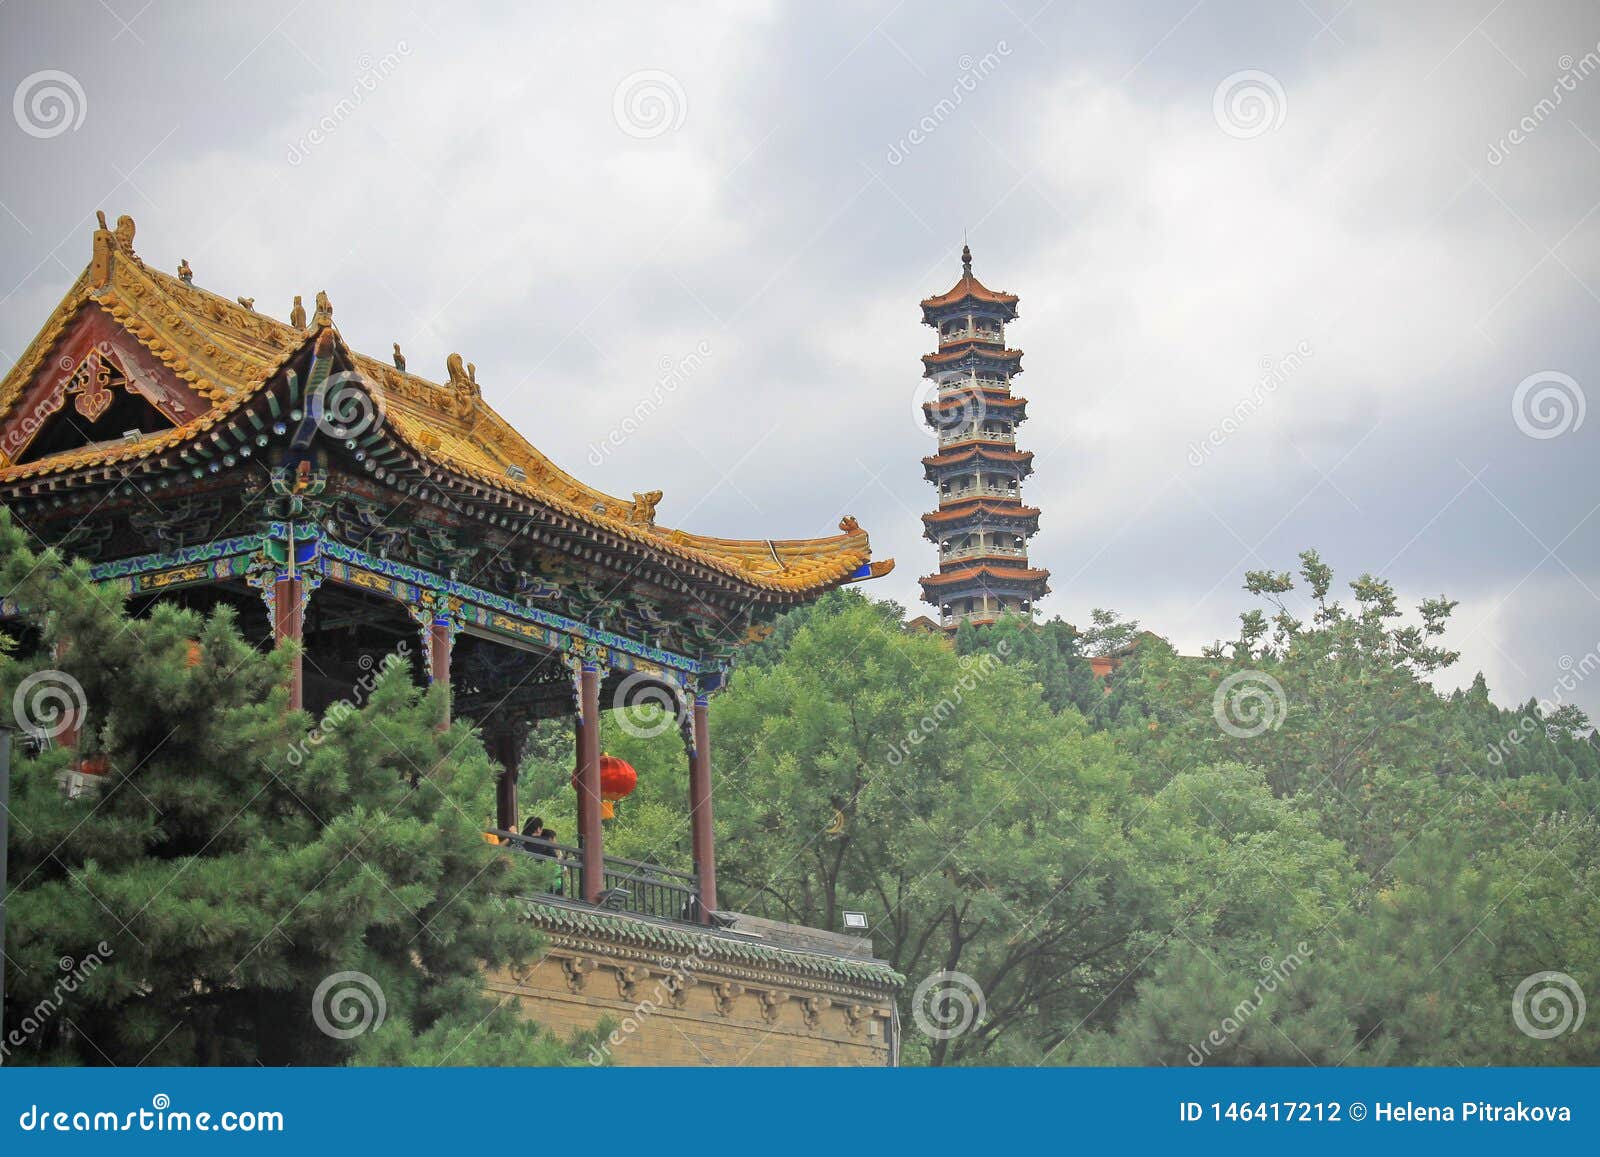 the pagoda and chinese palace in jincheng, house of huangchang chancellor entrance